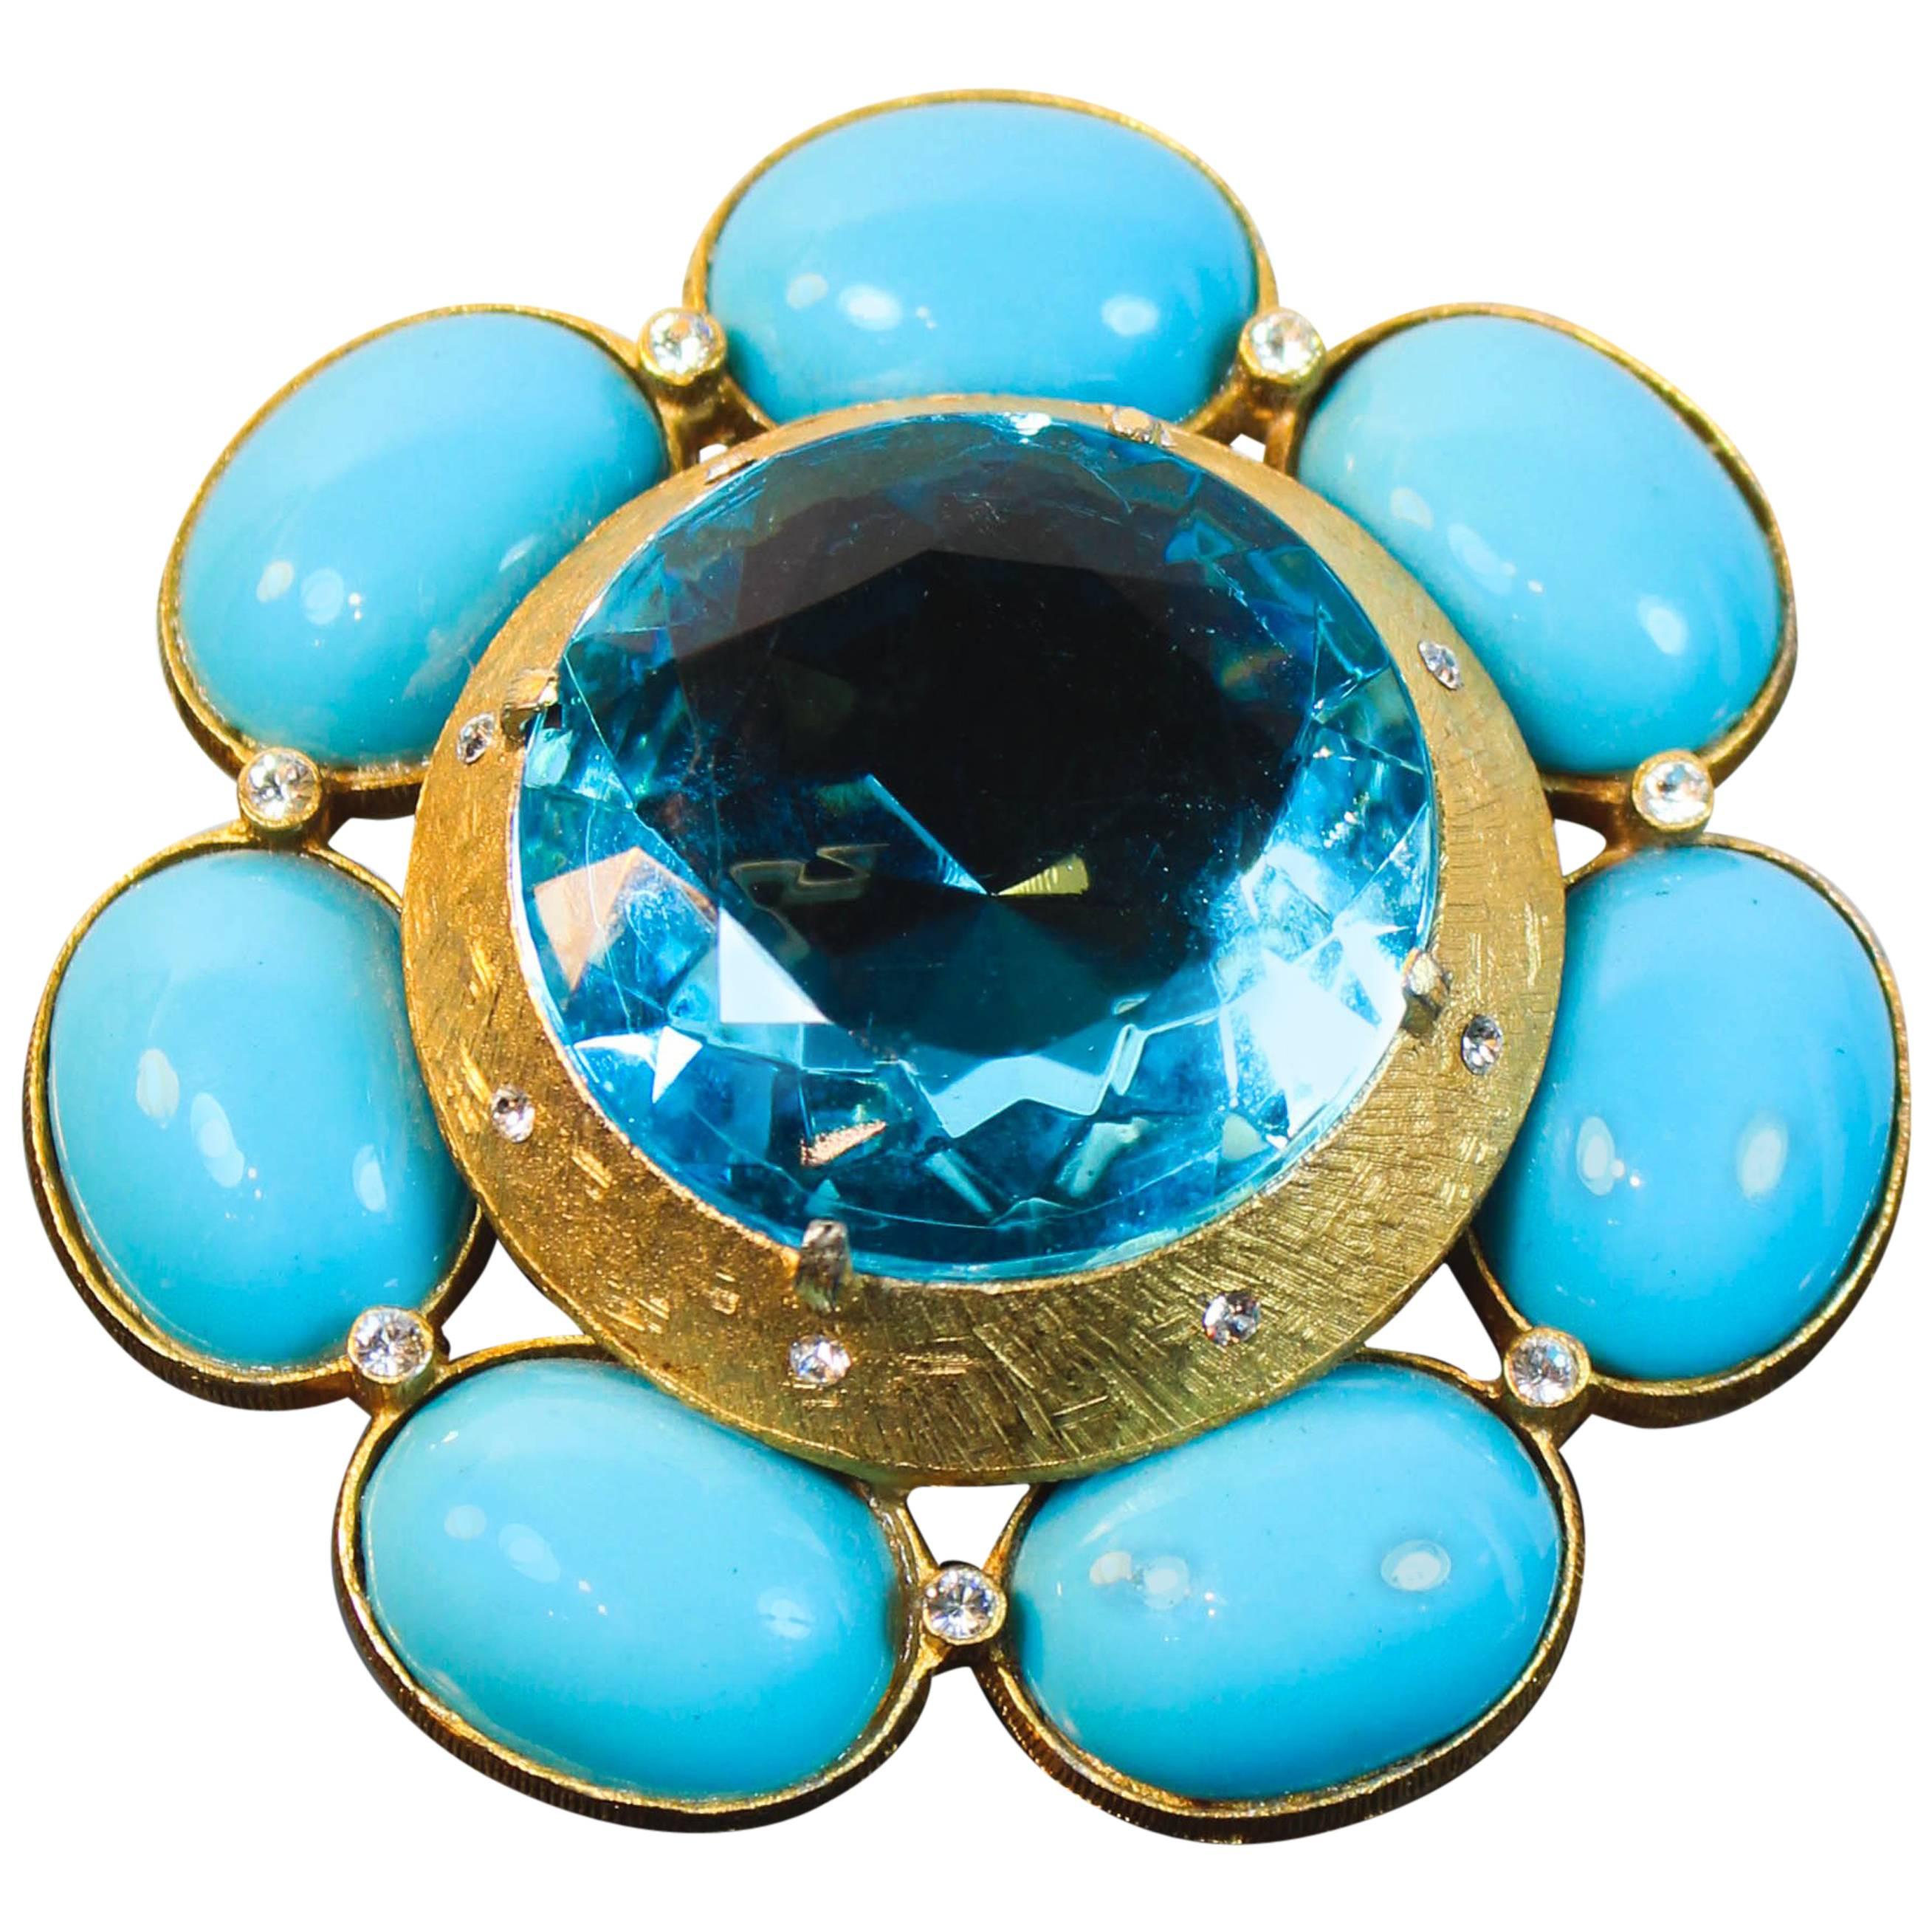 Briana Turquoise and Gold Hue Brooch with Rhinestones